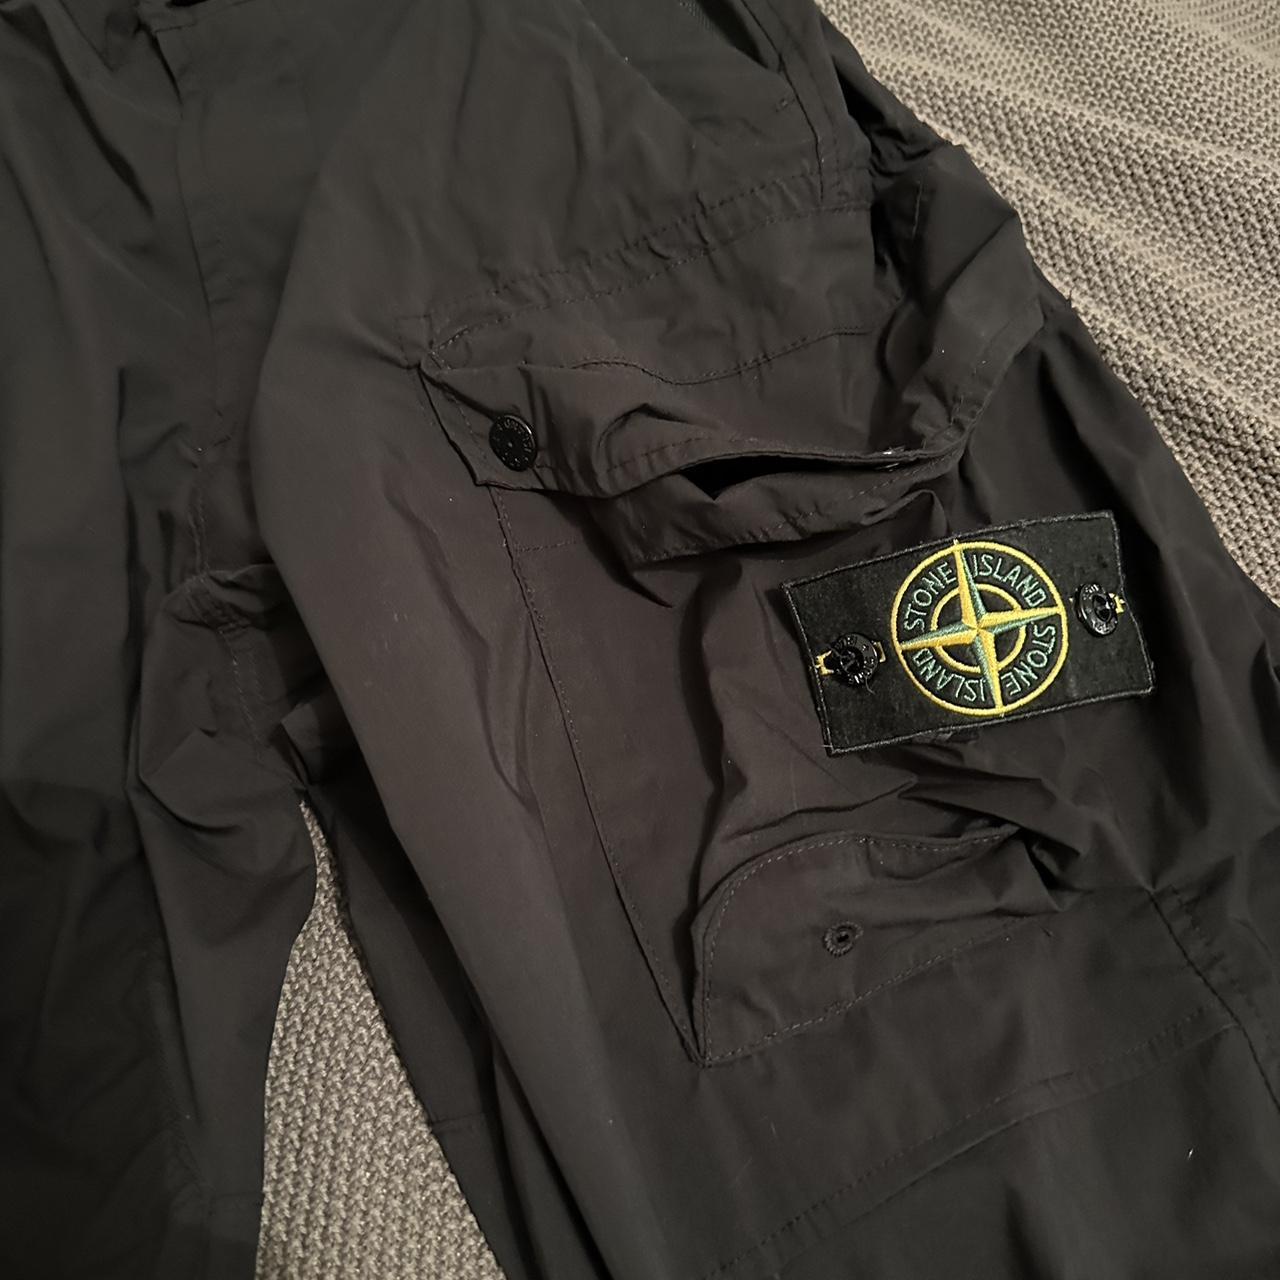 Stone Island Men's Black and Green Trousers | Depop